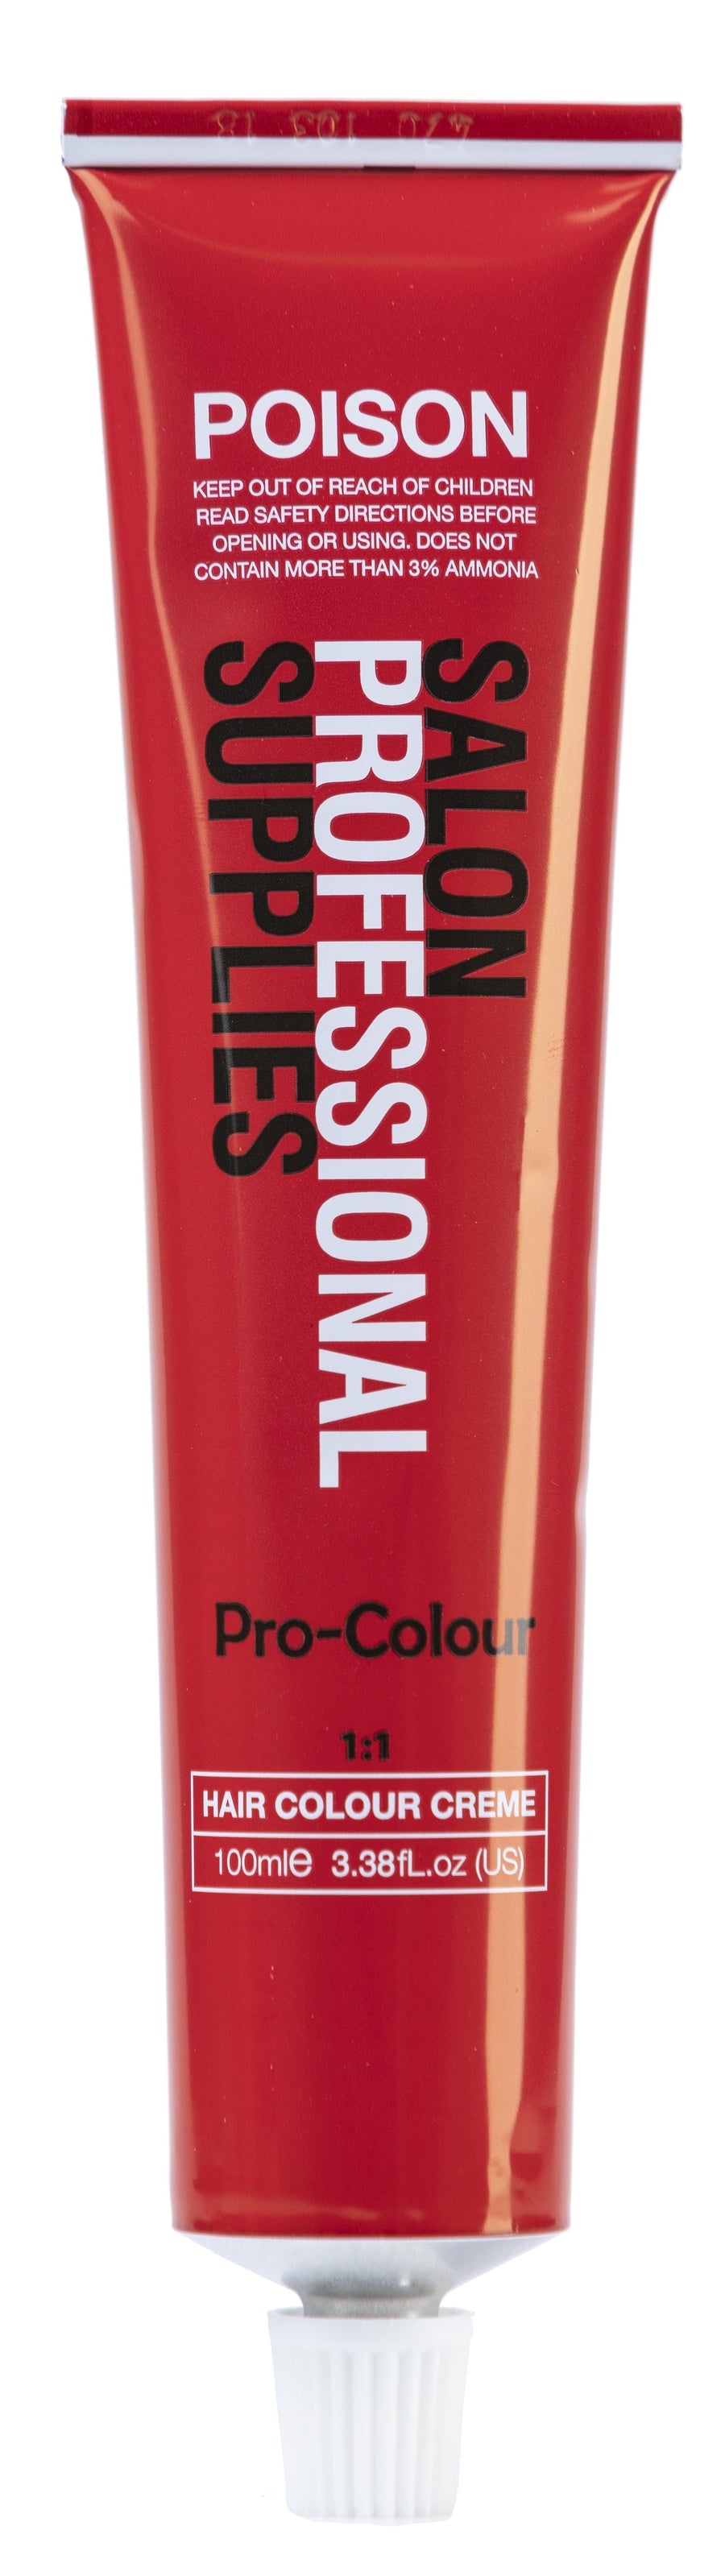 SPS Tint 5.74 Light Brown Copper Brown 100ml - Price Attack